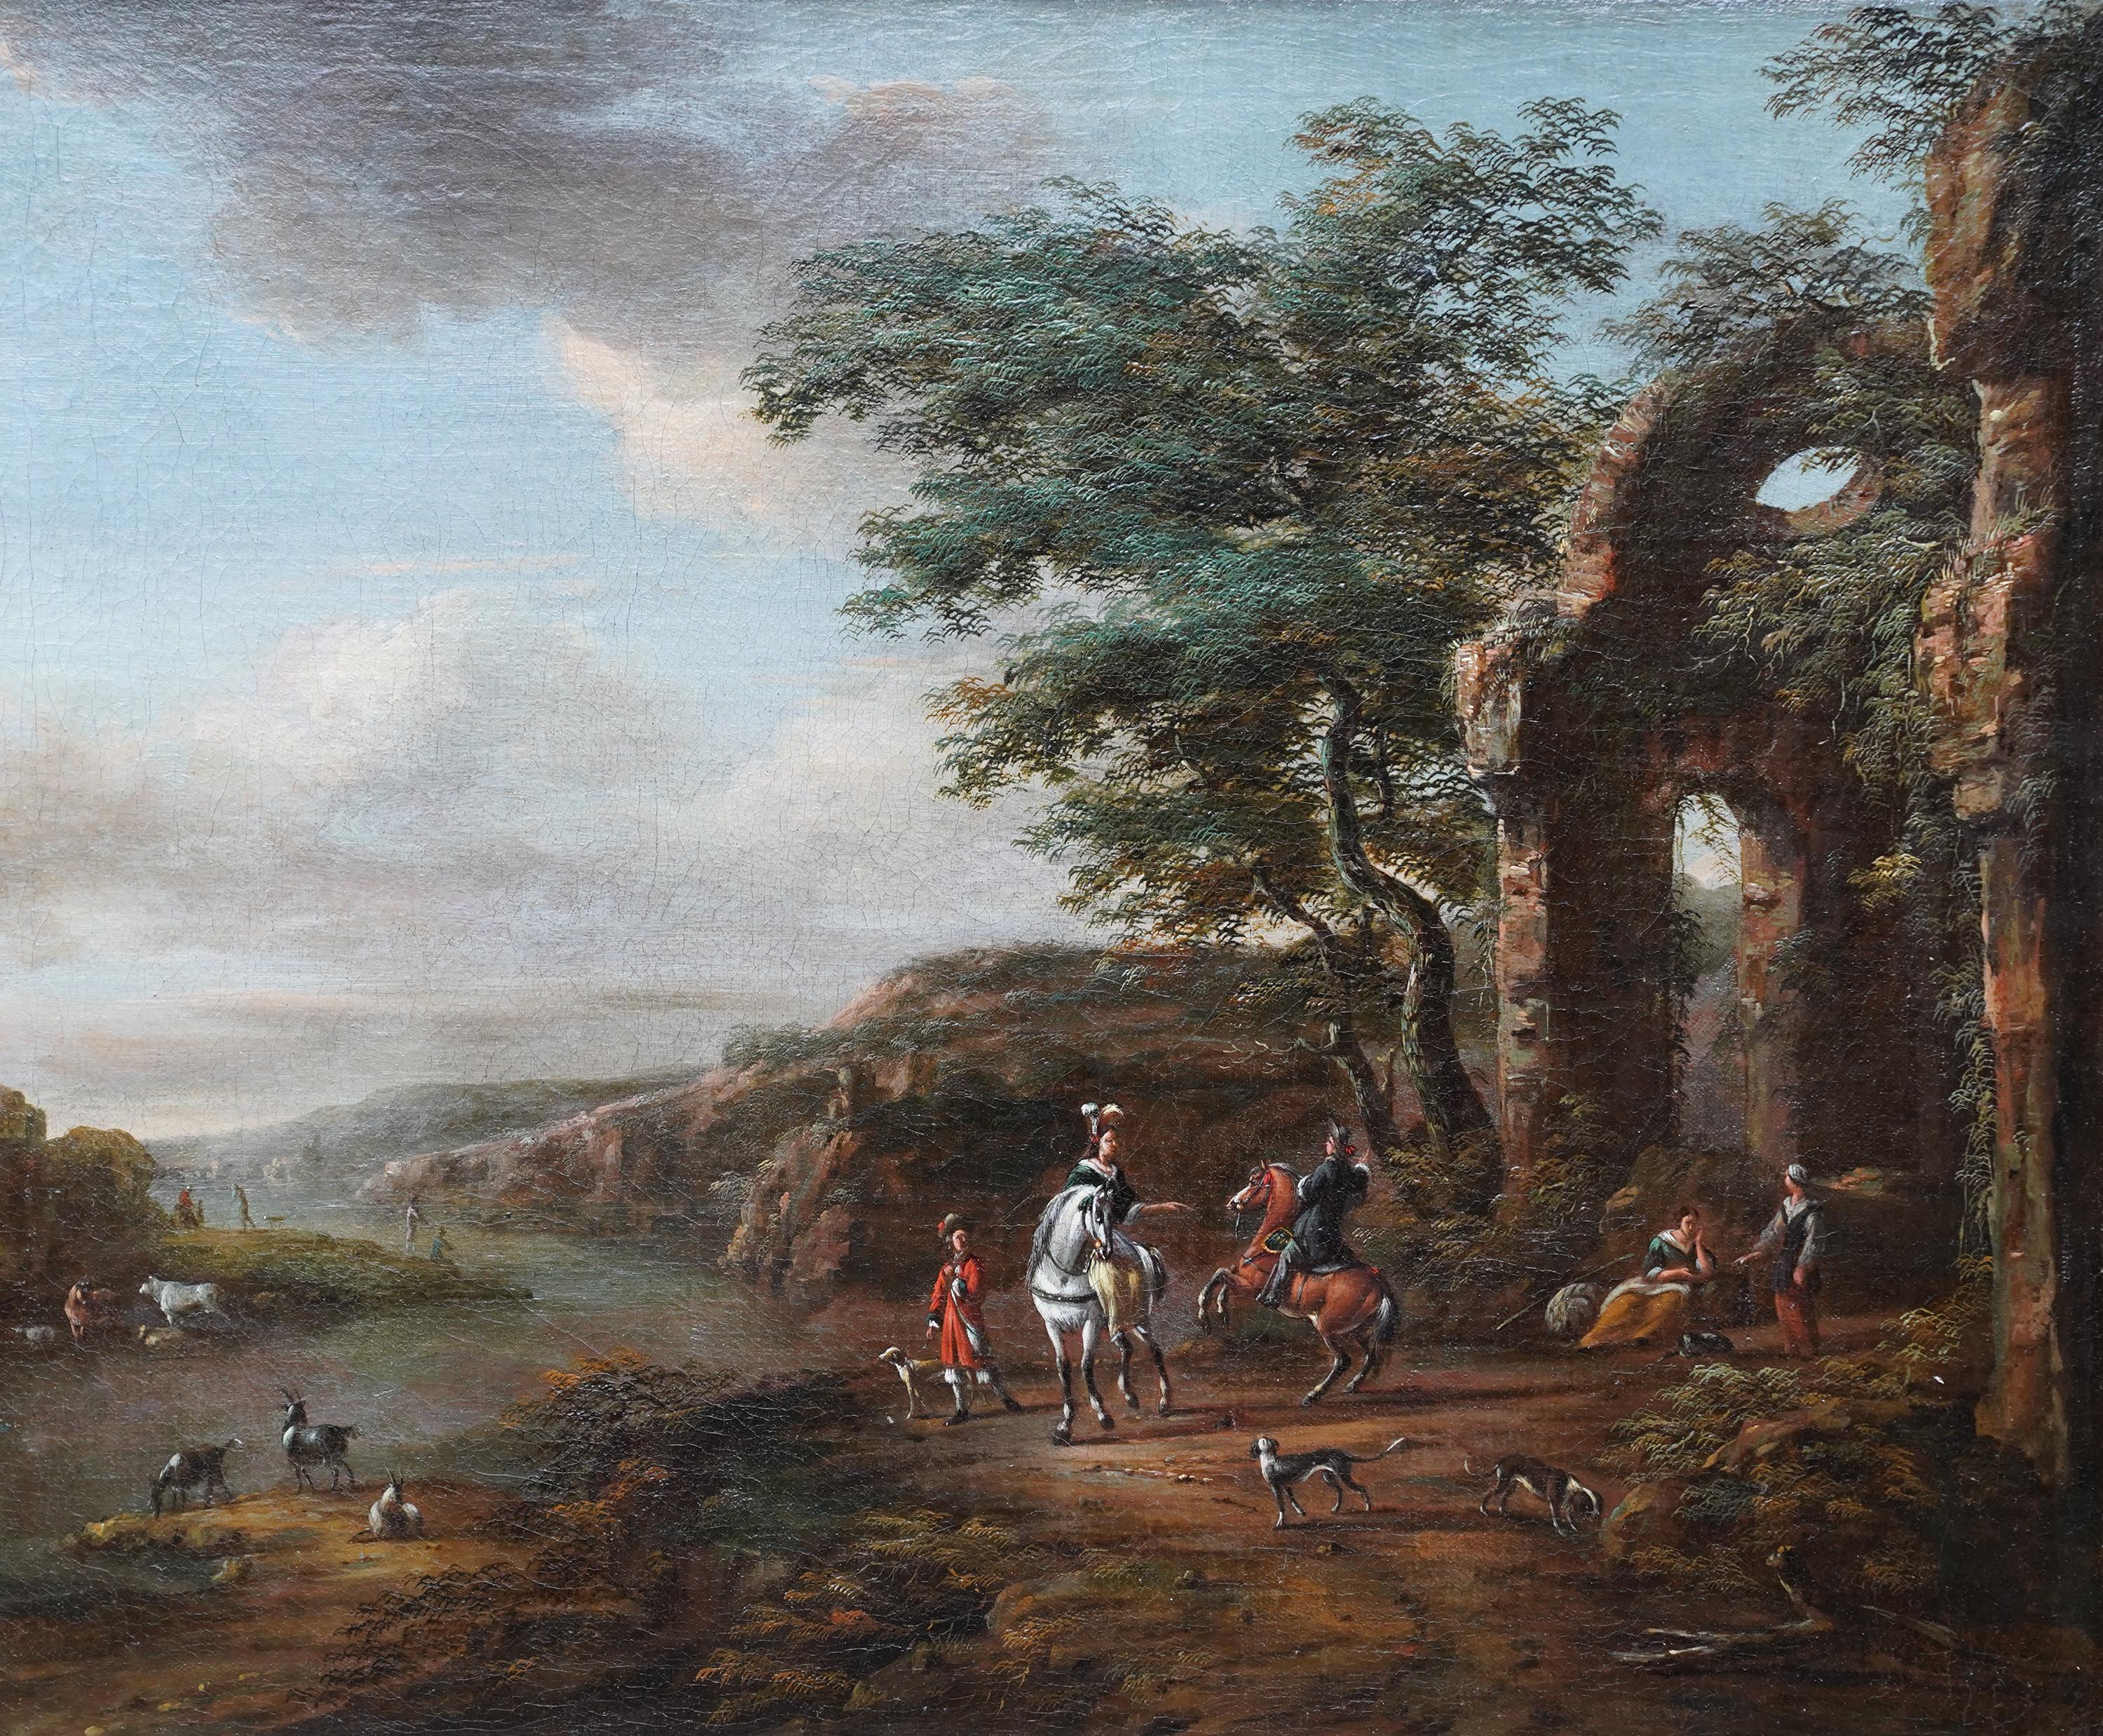 Travellers and Dogs in Landscape, Ruins on Right - Dutch Old Master oil painting For Sale 7